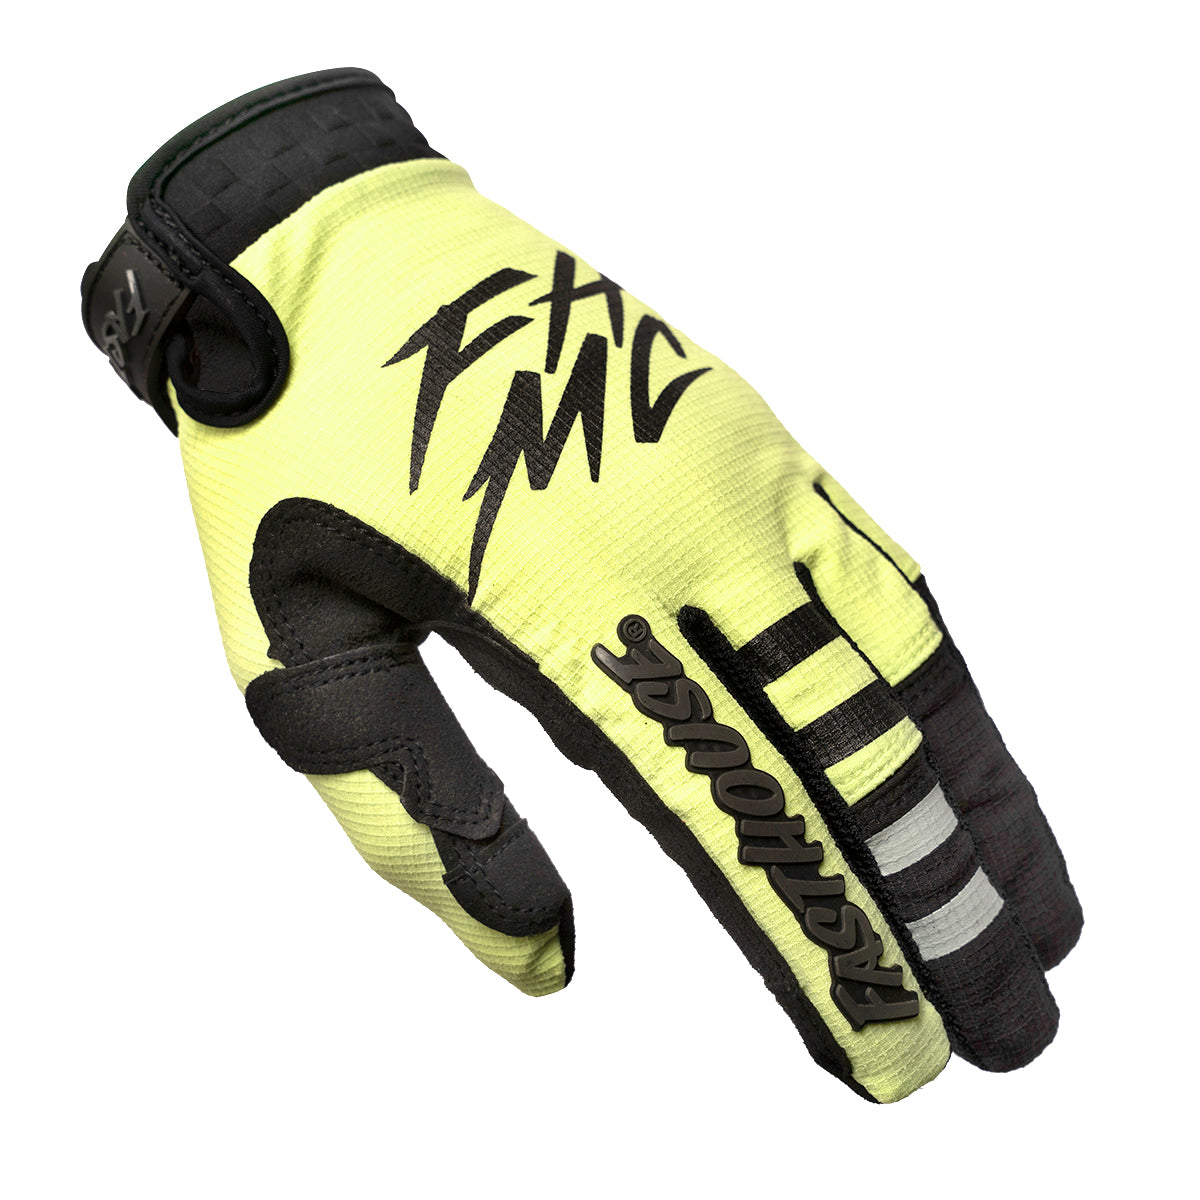 Speed Style Zenith Glove - Skyline/Party Lime